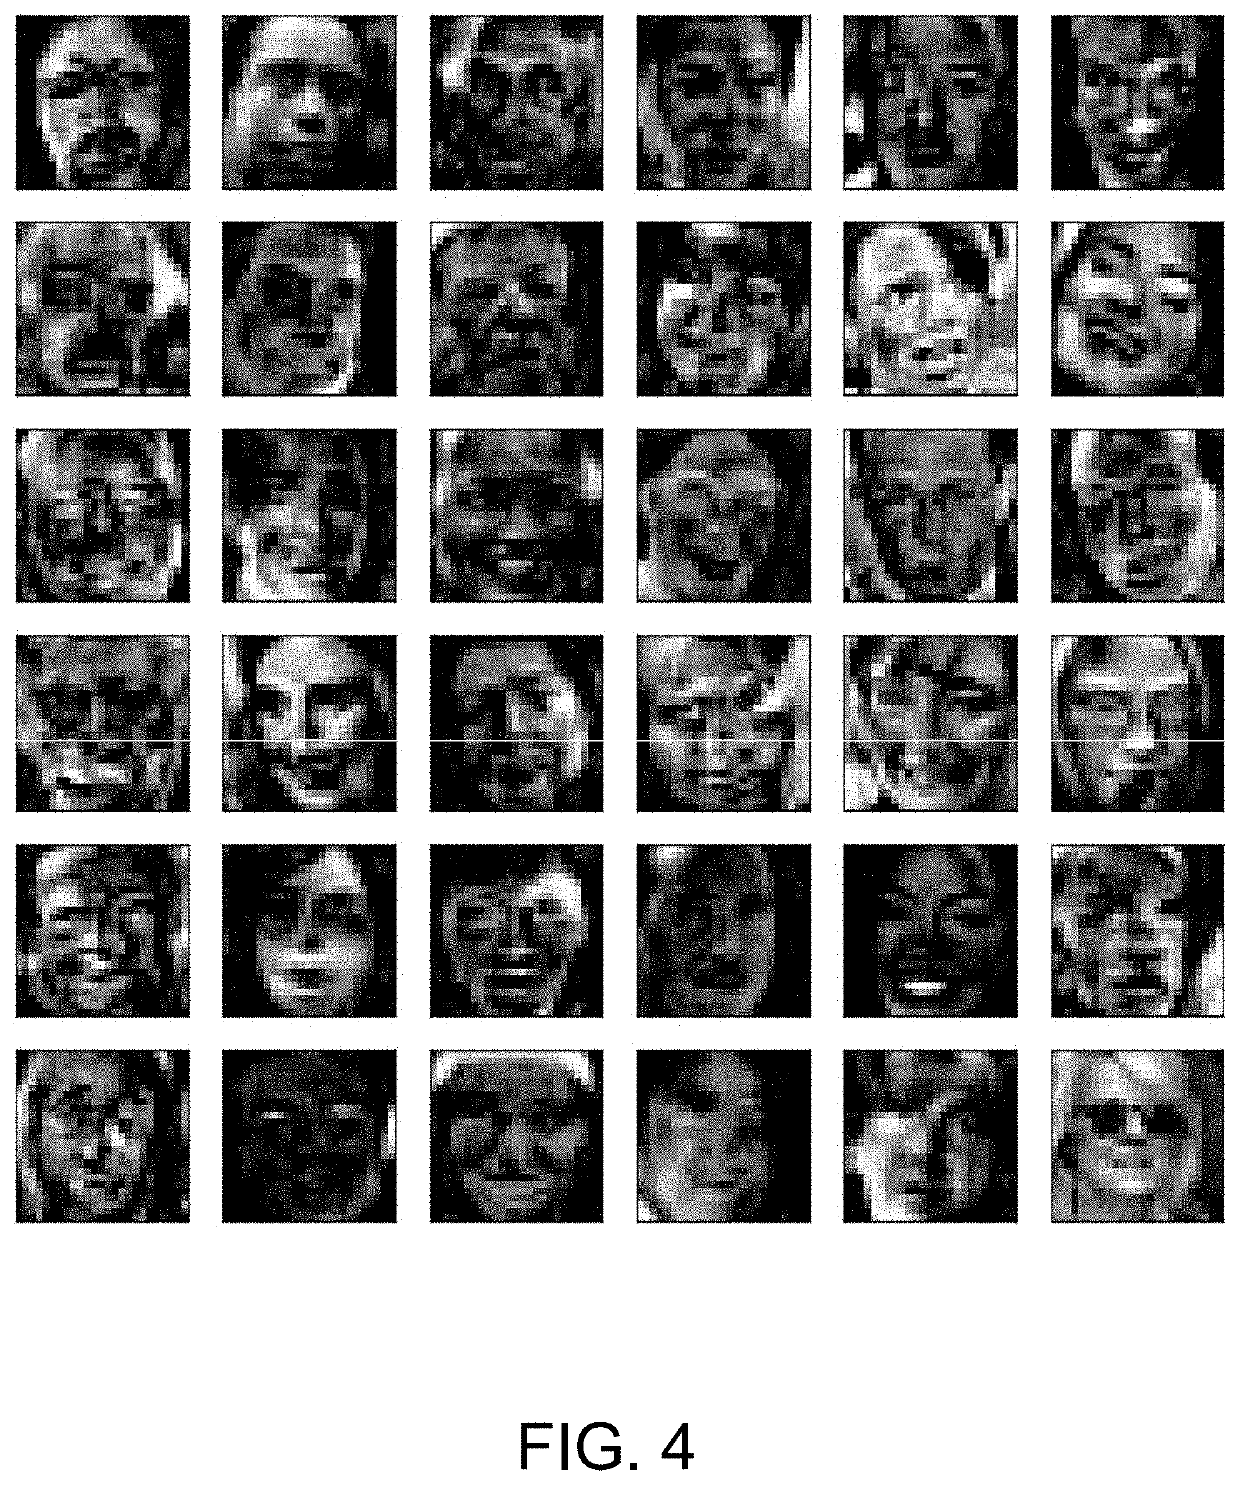 Facial image recognition using pseudo-images